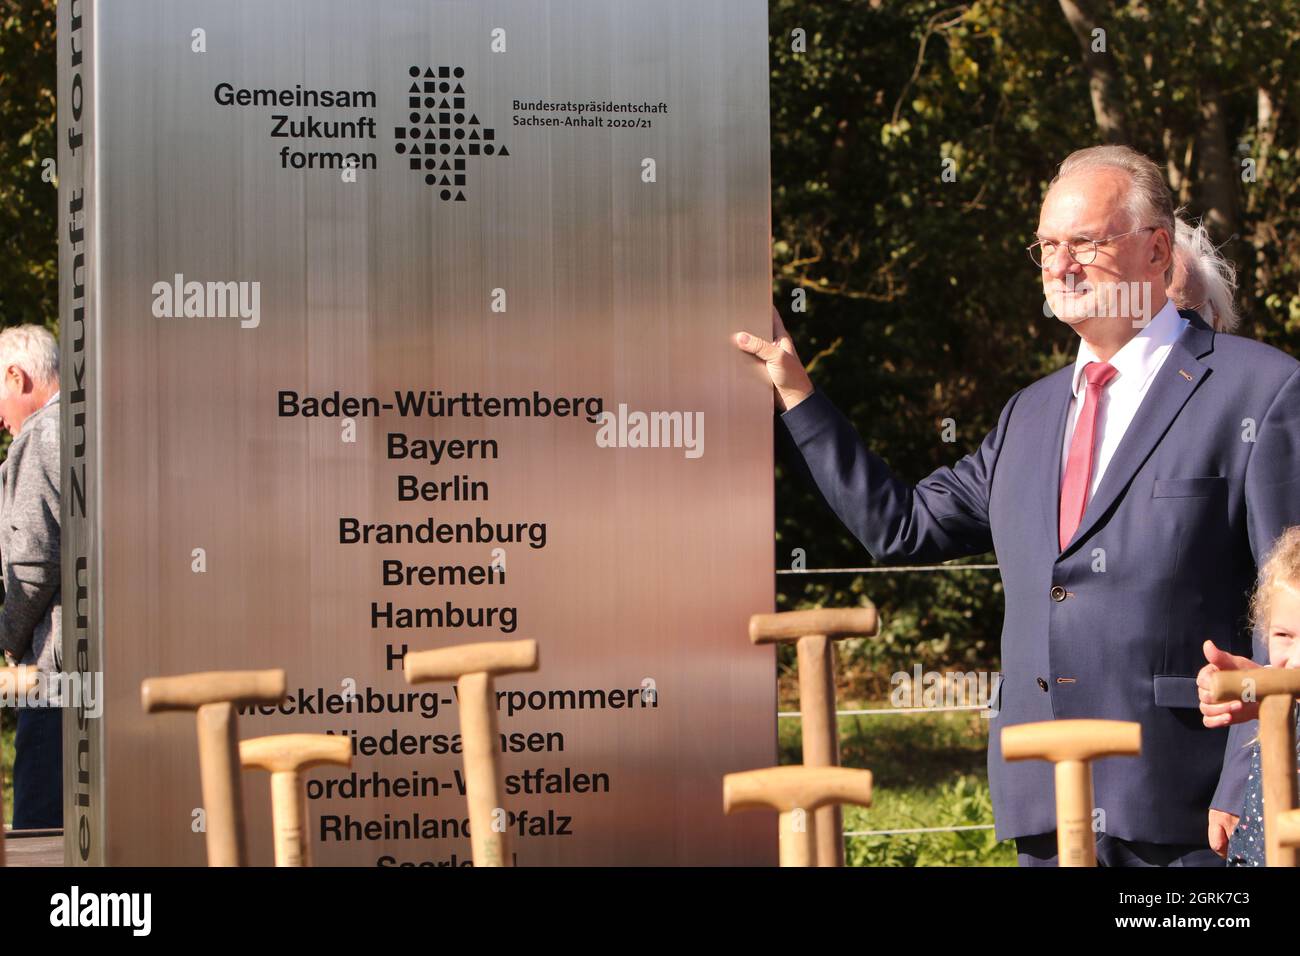 01 October 2021, Saxony-Anhalt, Hötensleben: Saxony-Anhalt's Prime Minister Reiner Haseloff stands with the Unity Ambassadors from all the federal states in front of a stele that was unveiled together earlier. Photo: Matthias Bein/dpa-Zentralbild/ZB Stock Photo